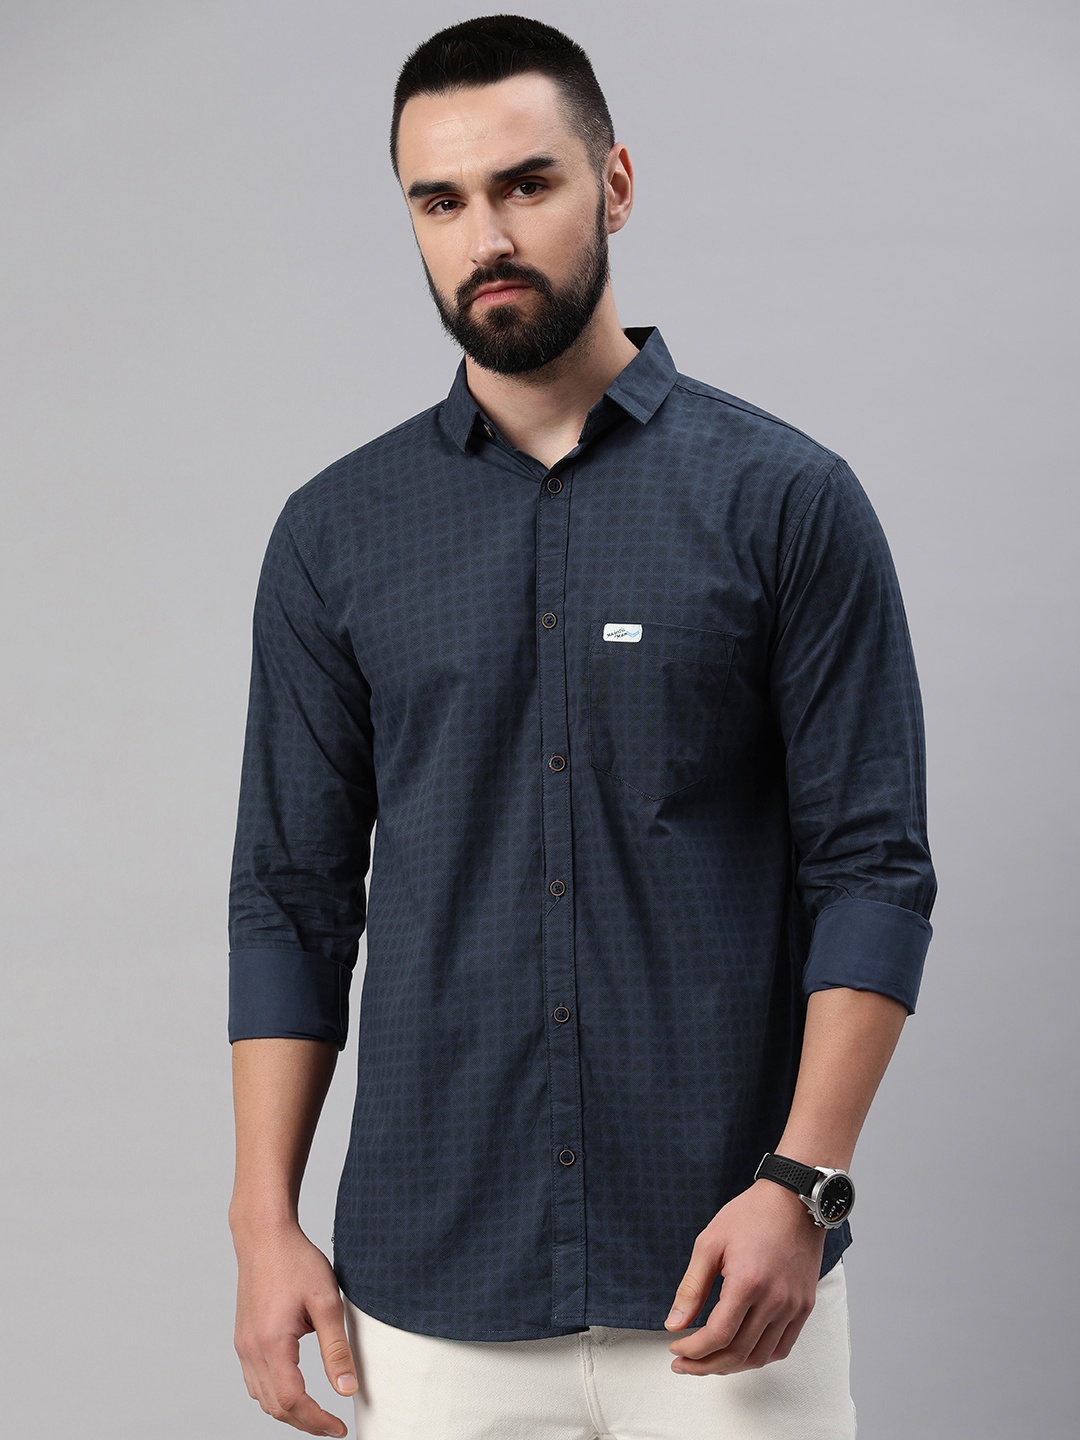 

Majestic Man Men Comfort Slim Fit Opaque Checked Pure Cotton Casual Shirt, Navy blue